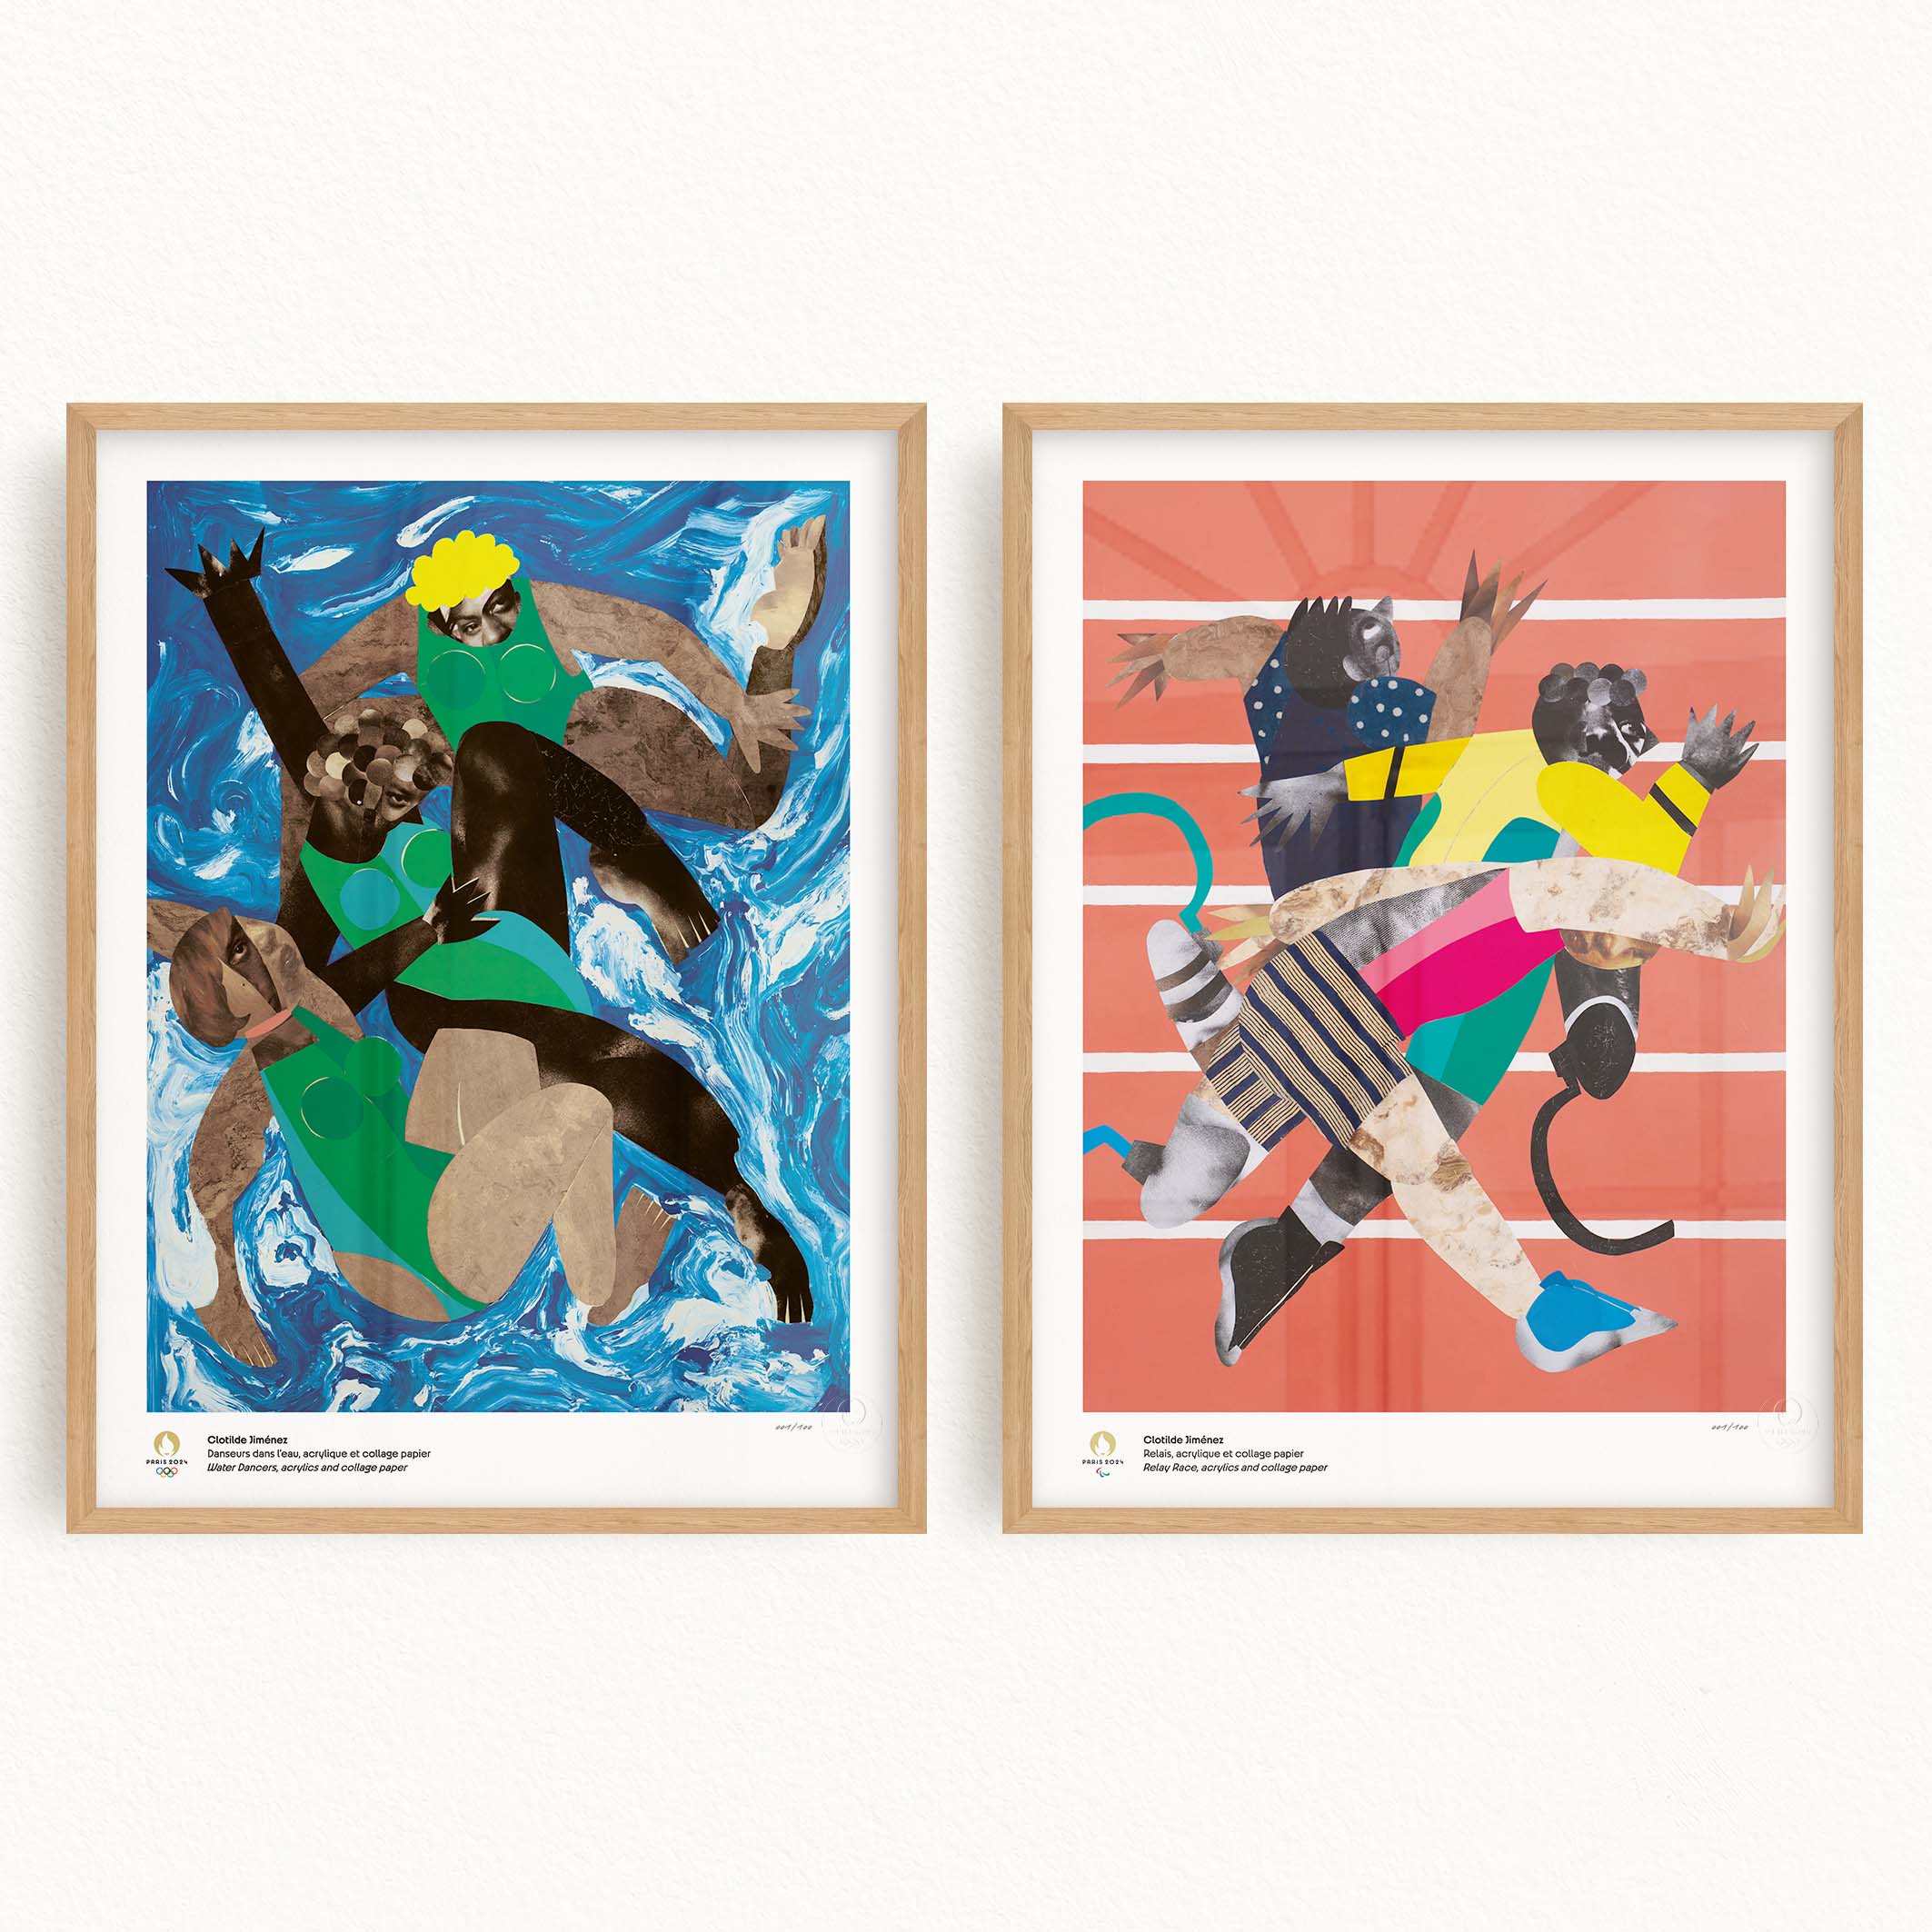 Diptych of Paris 2024 artistic posters for the Olympic and Paralympic Games by Clotilde Jiménez